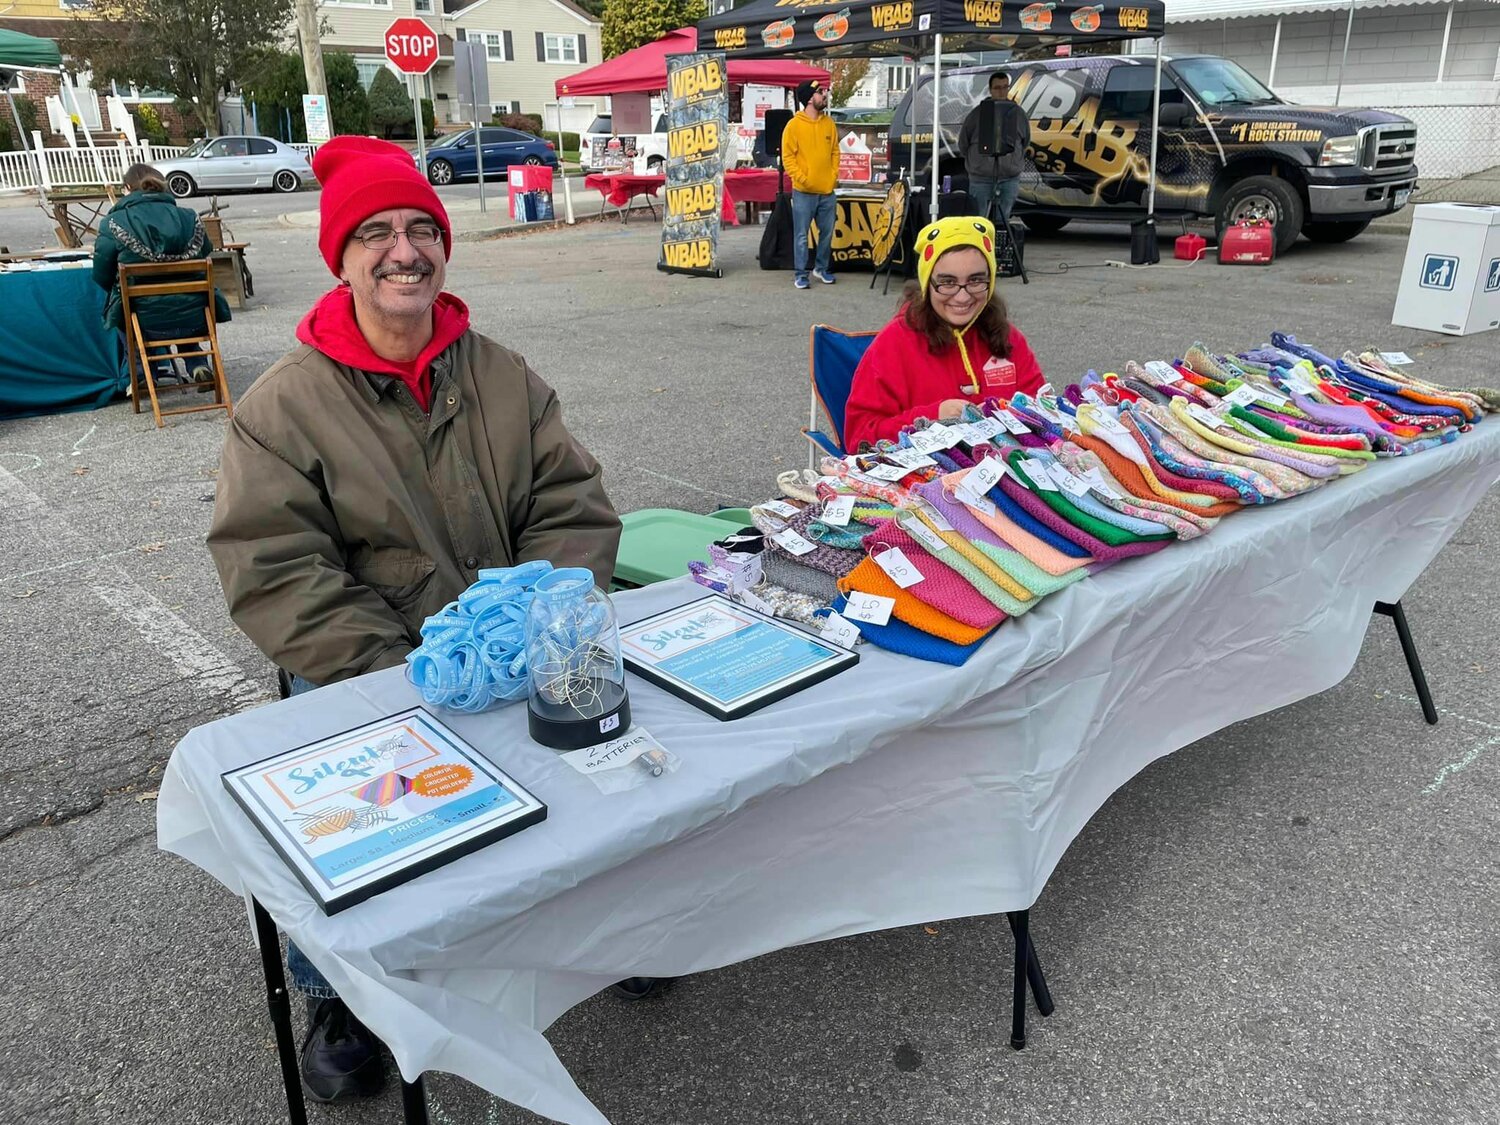 Jessica Pormigiano, a Franklin Square resident who has selective mutism, sells her handcrafted potholders at community marketplaces and boutique sales. Neighbors can purchase small, medium or large potholders for $3, $5 or $8.